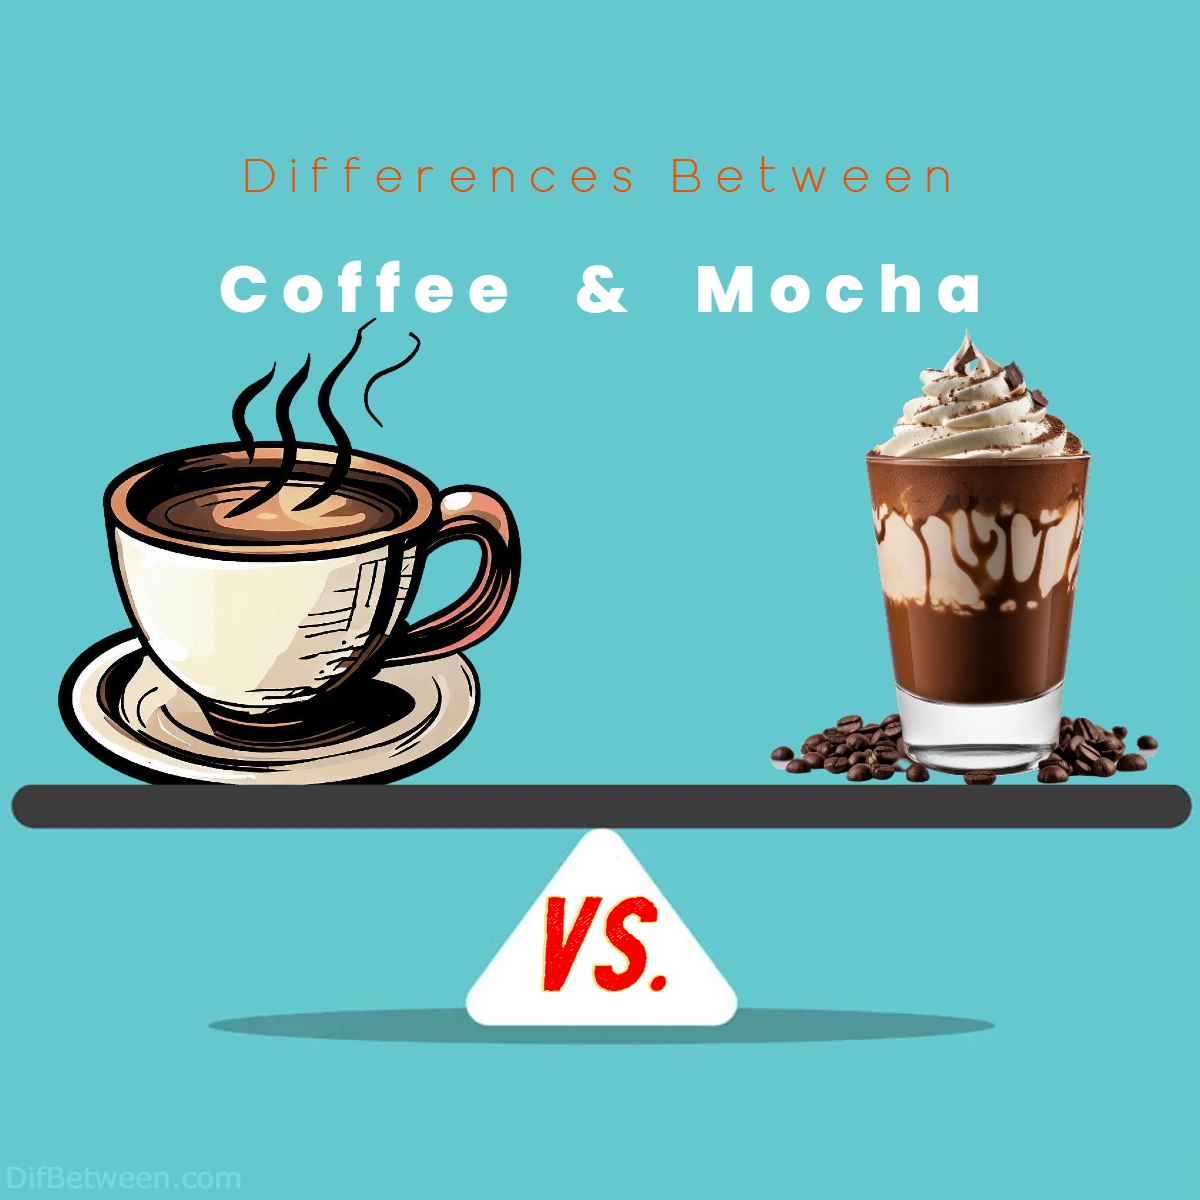 Difference Between Coffee and Mocha